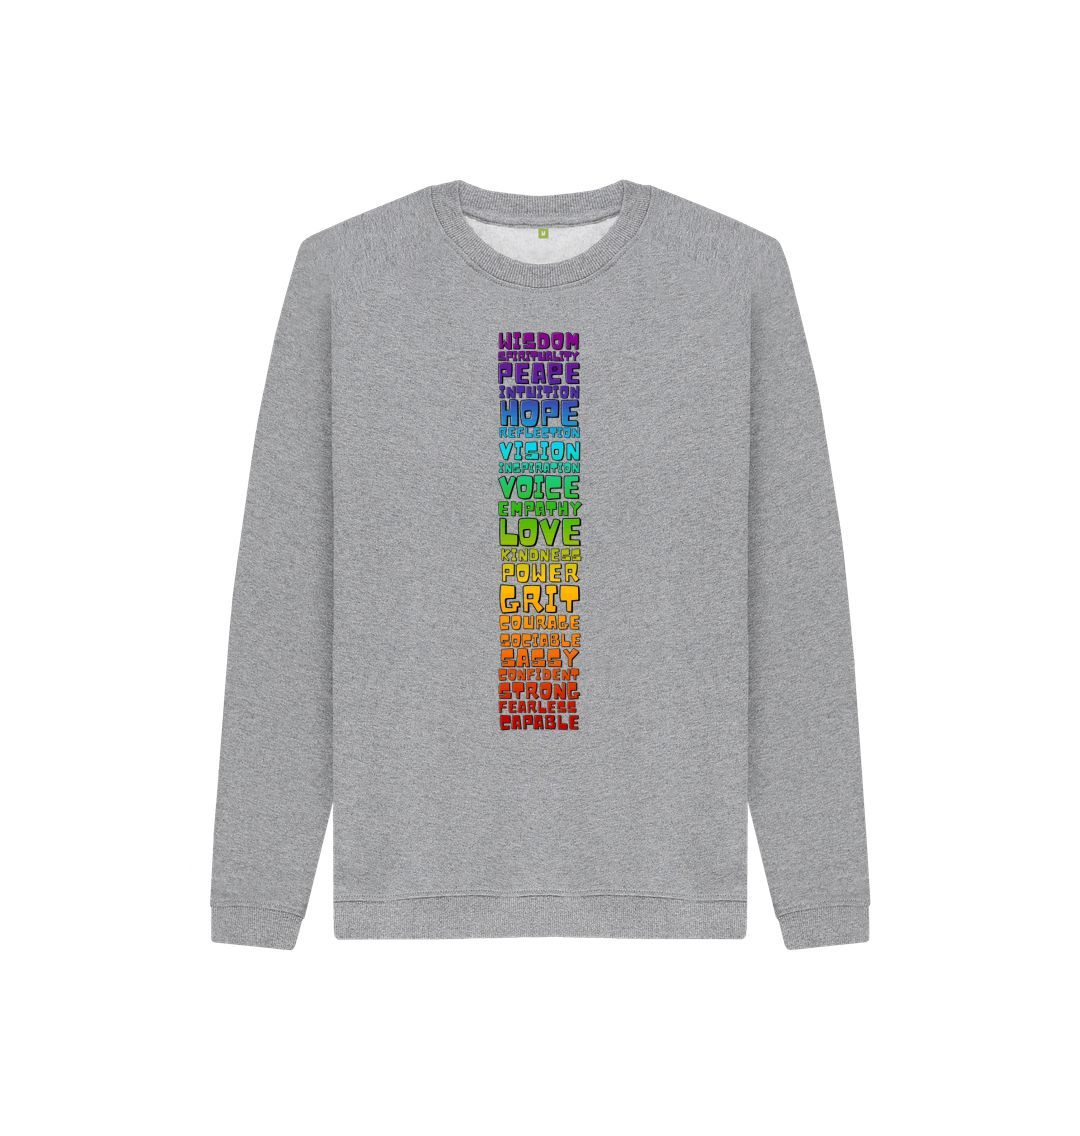 Athletic Grey Youth Sweatshirt - Chakra Words to Empower